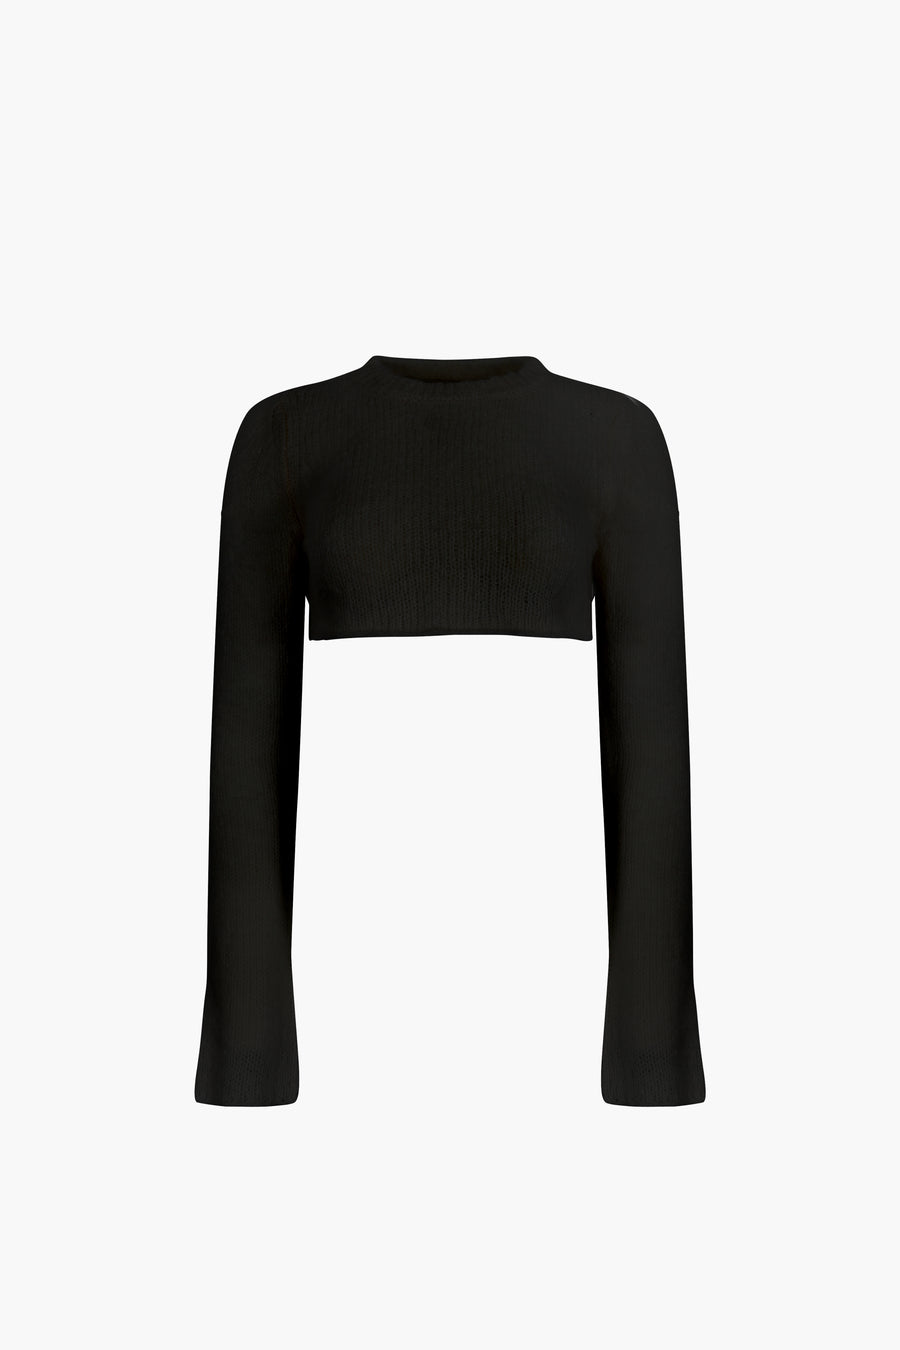 Cropped knit sweater in black